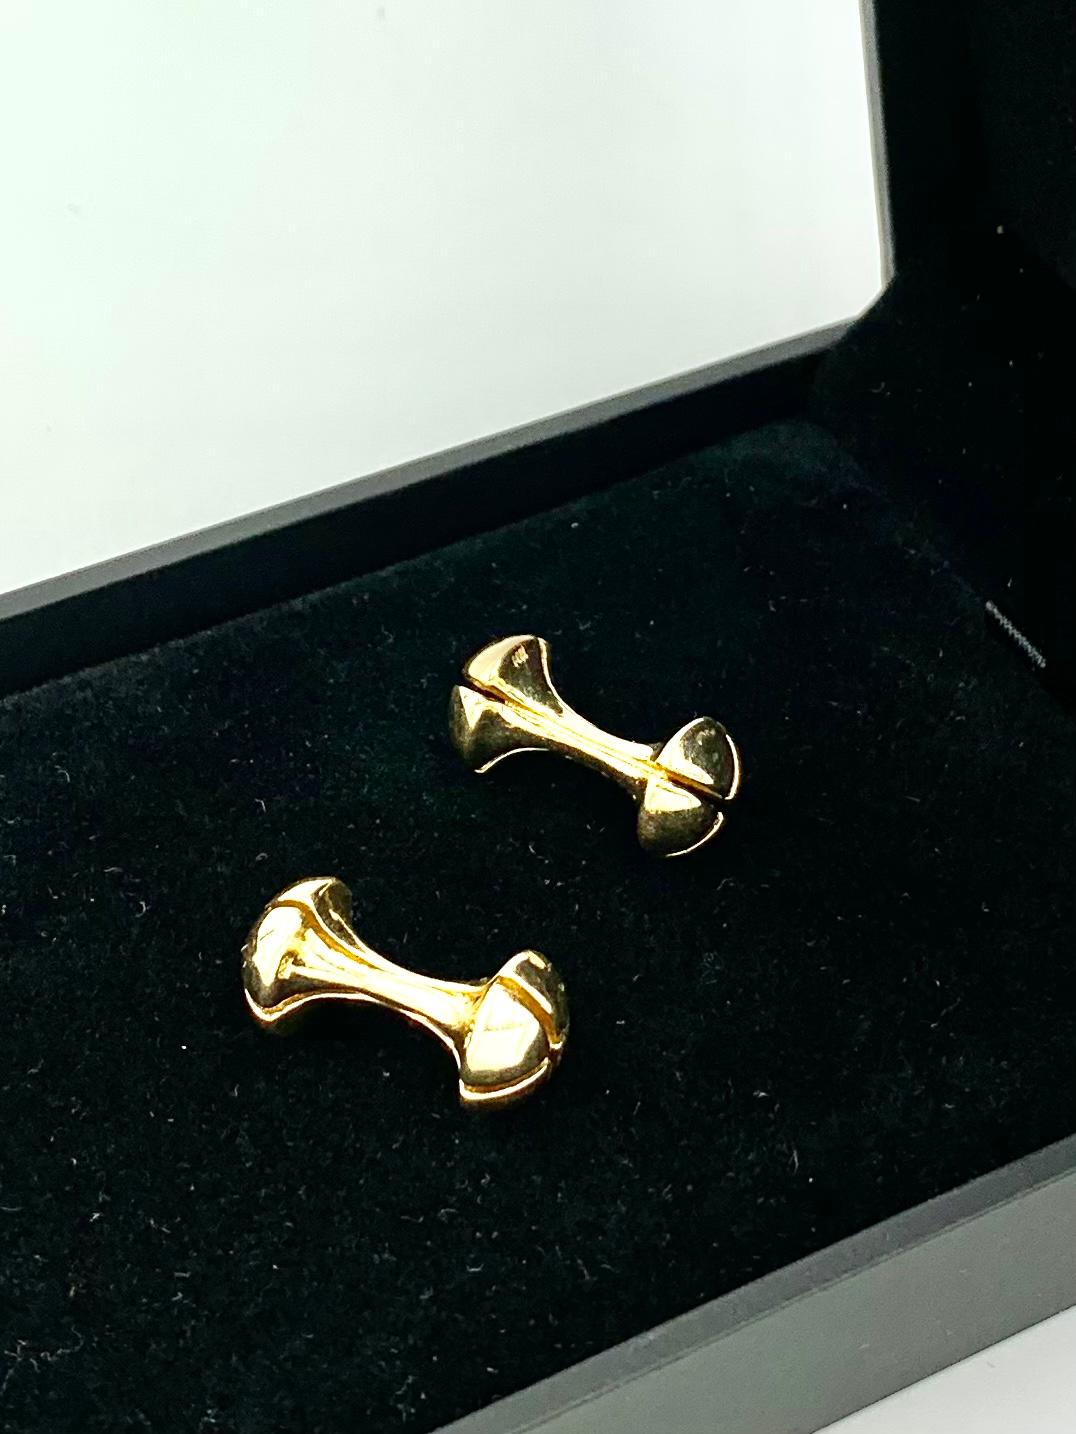 Fabulous MCM industrial style heavy solid gold Phillips Head Screw cufflinks.
Mid 20th Century
Great streamlined details, beautifully finished, interesting conversation piece and a memorable gift. Cartier pioneered the industrial style in jewelry